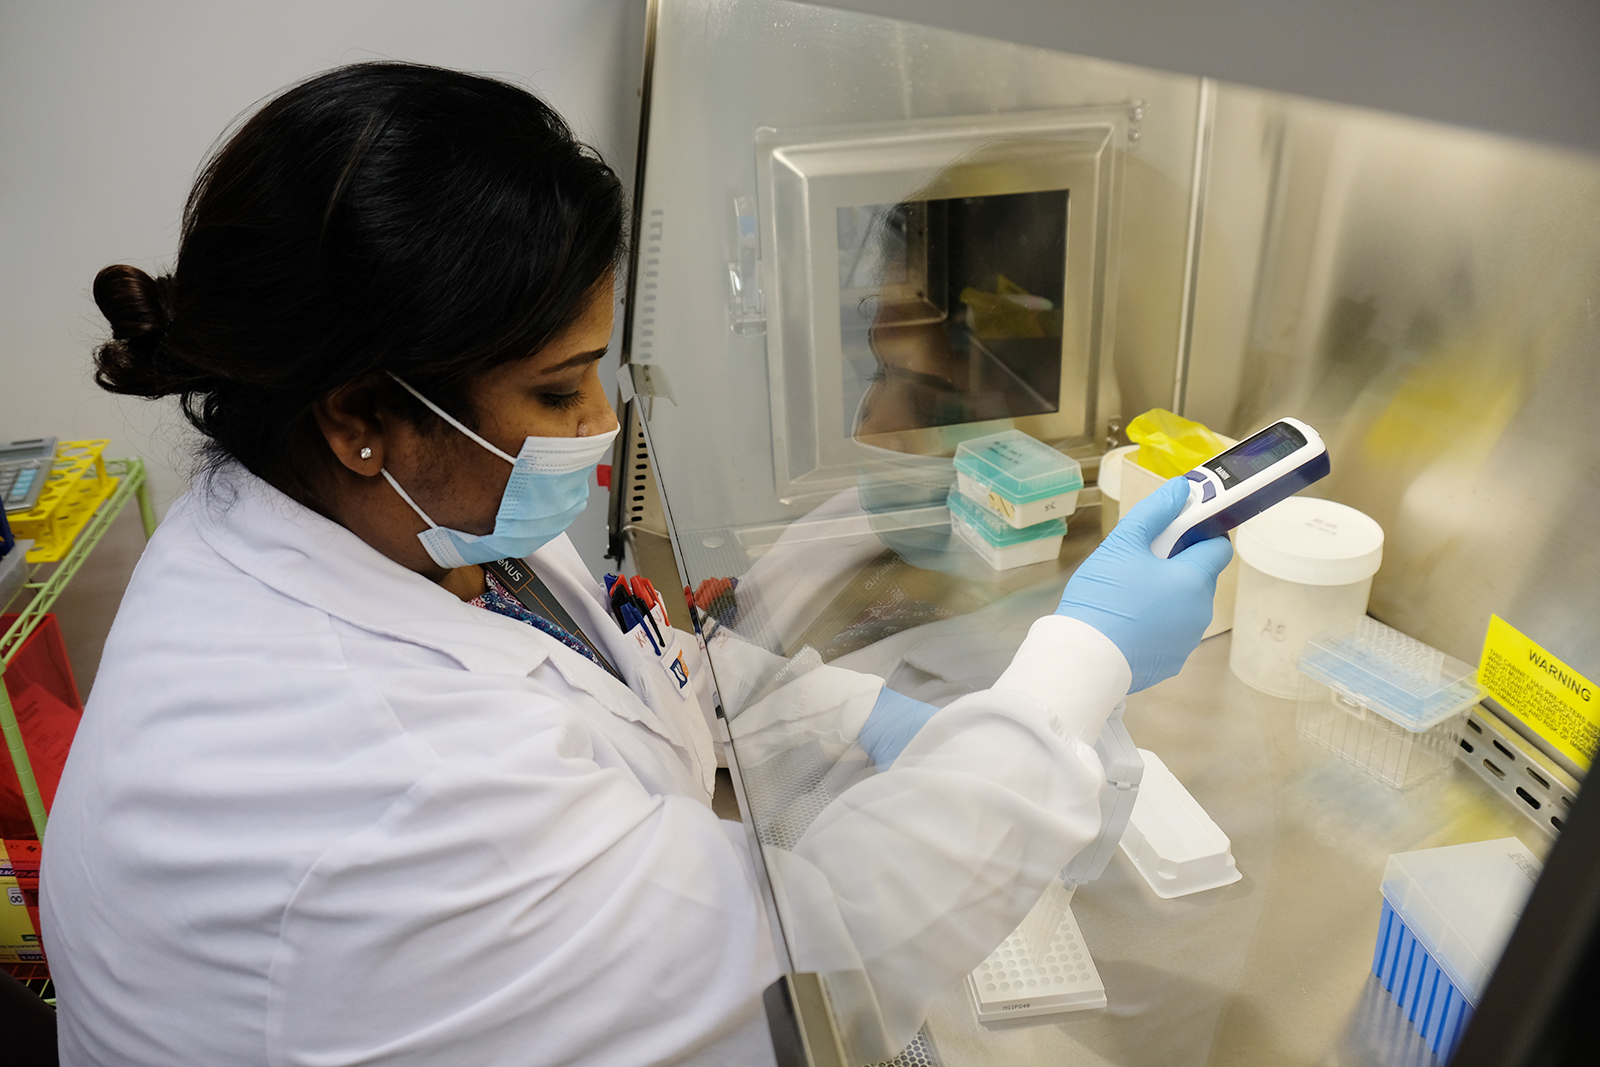 Kamini, isolating and studying the T cells